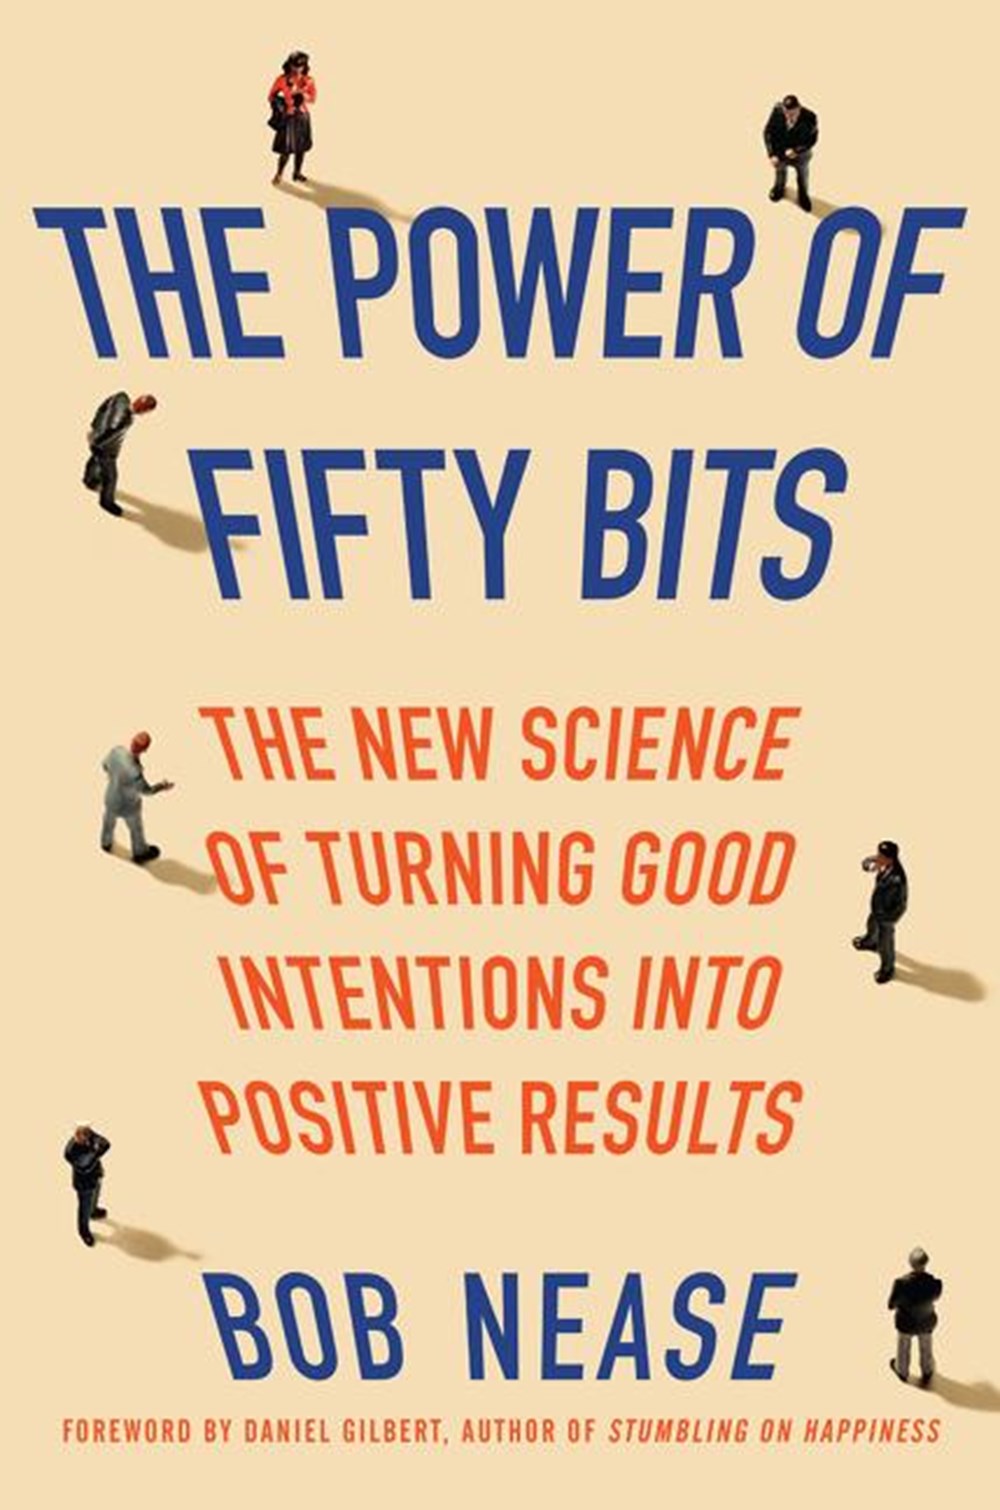 Power of Fifty Bits The New Science of Turning Good Intentions Into Positive Results